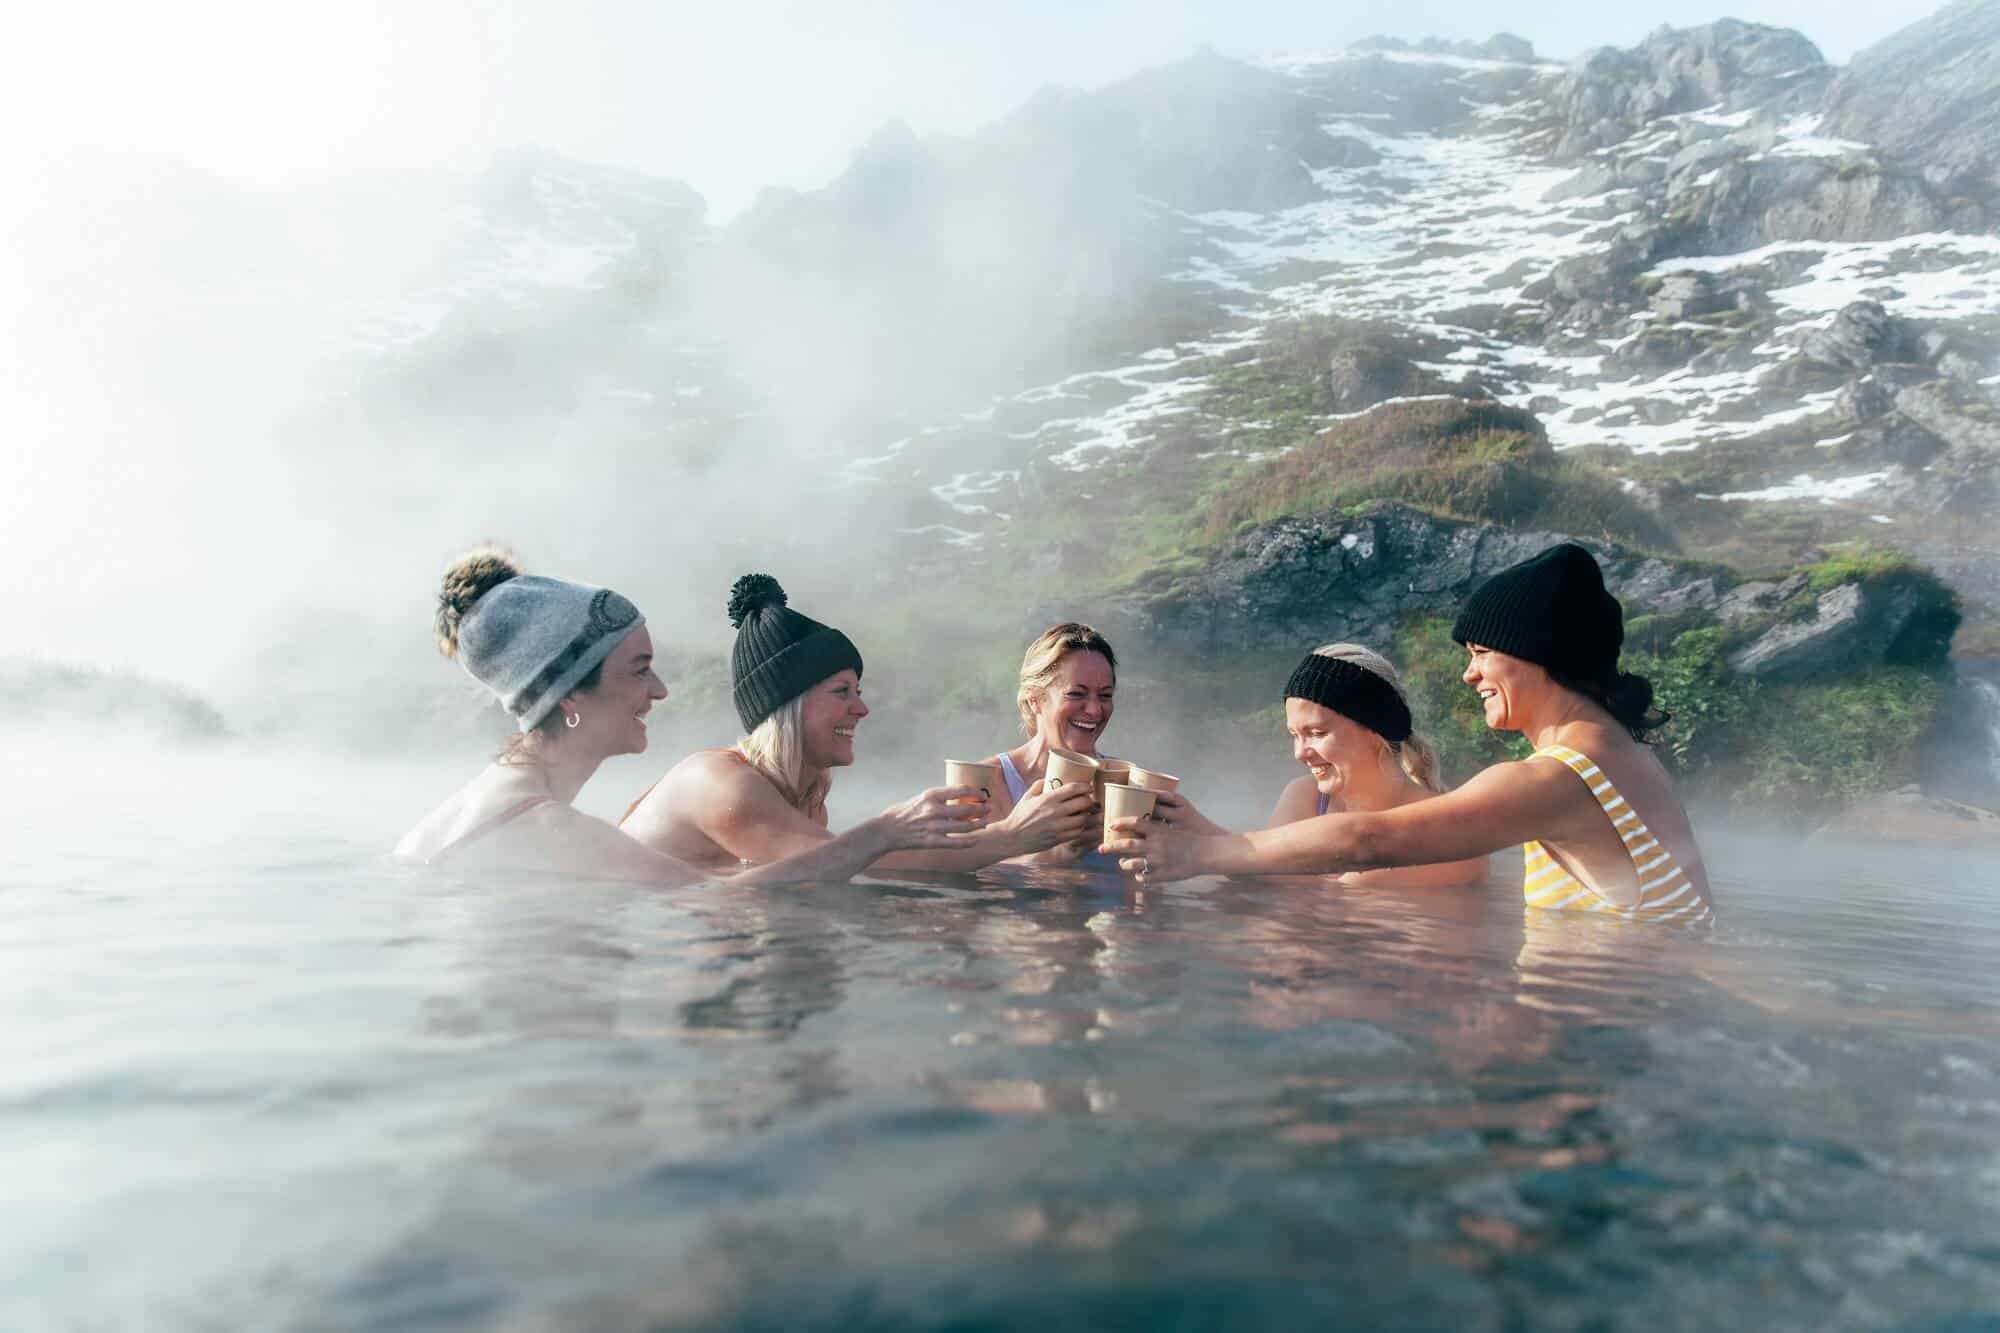 A group of women clink glasses in the famouns Landmannalaugar hot spring on the edge of the highlands.